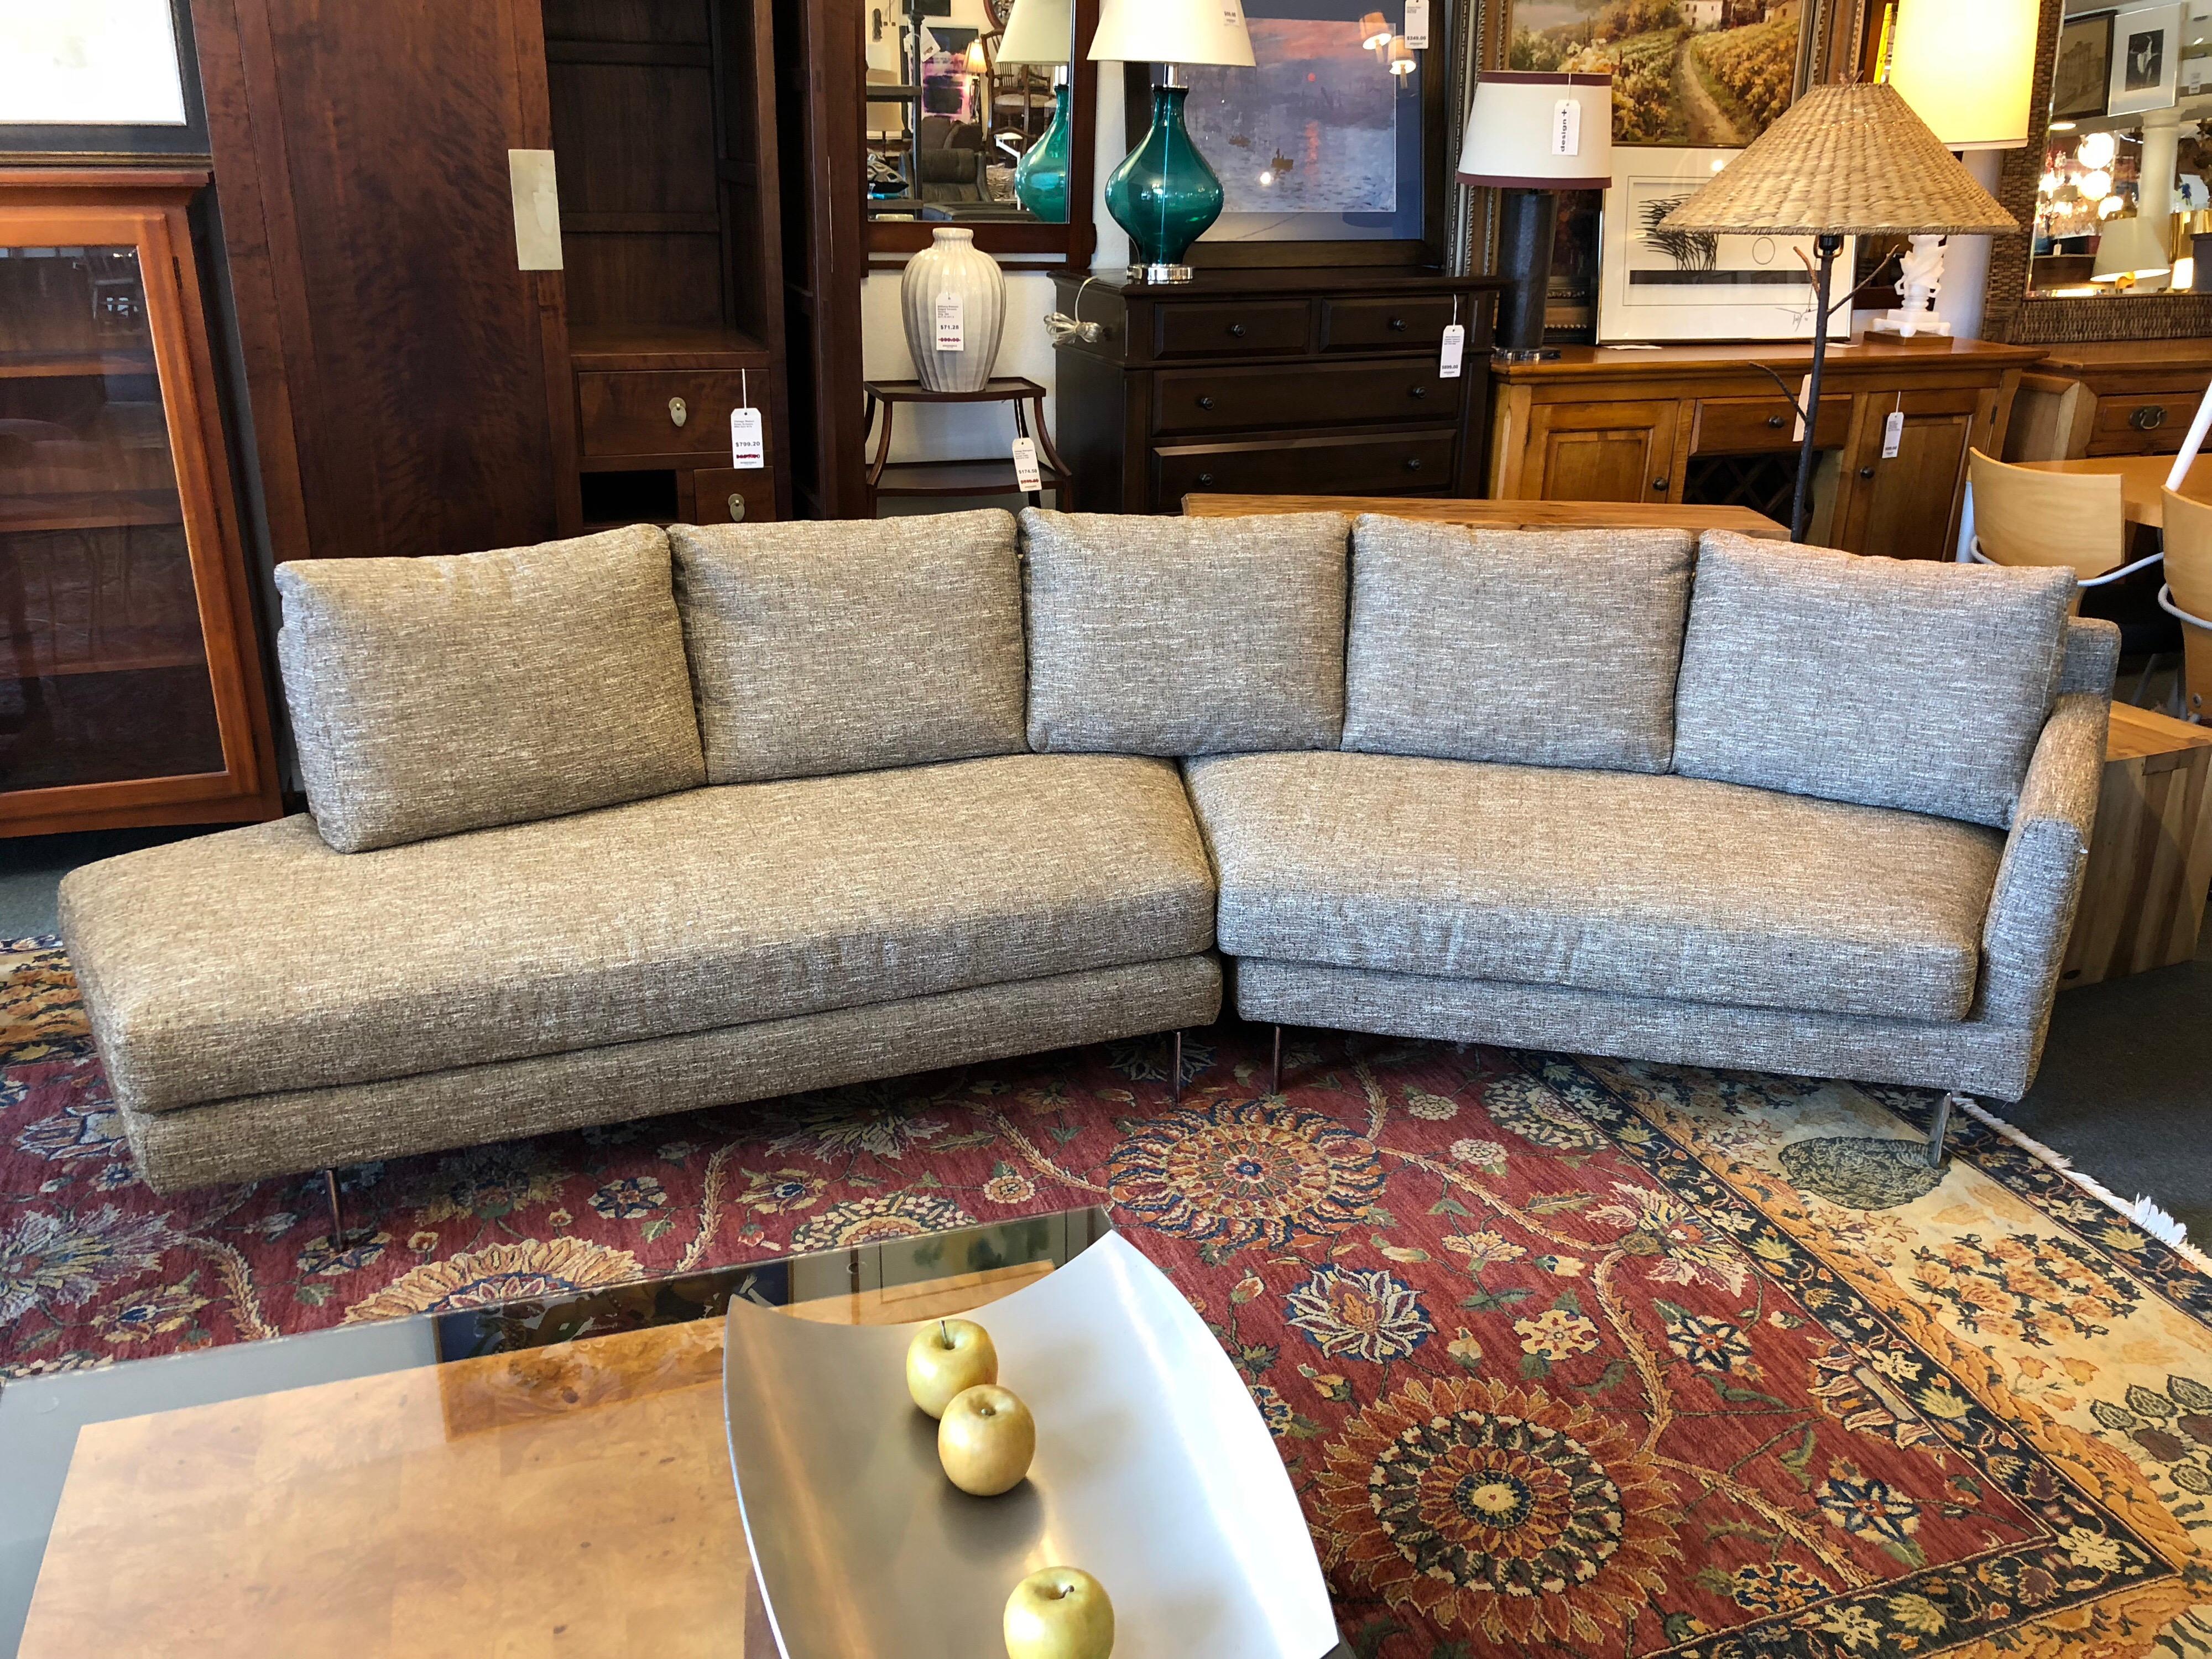 A new Alexa sectional, by Della Robbia. This two-piece invites conversation, with angled arrangement, down and feather cushions and textured upholstery. Crafted of hardwood with 3